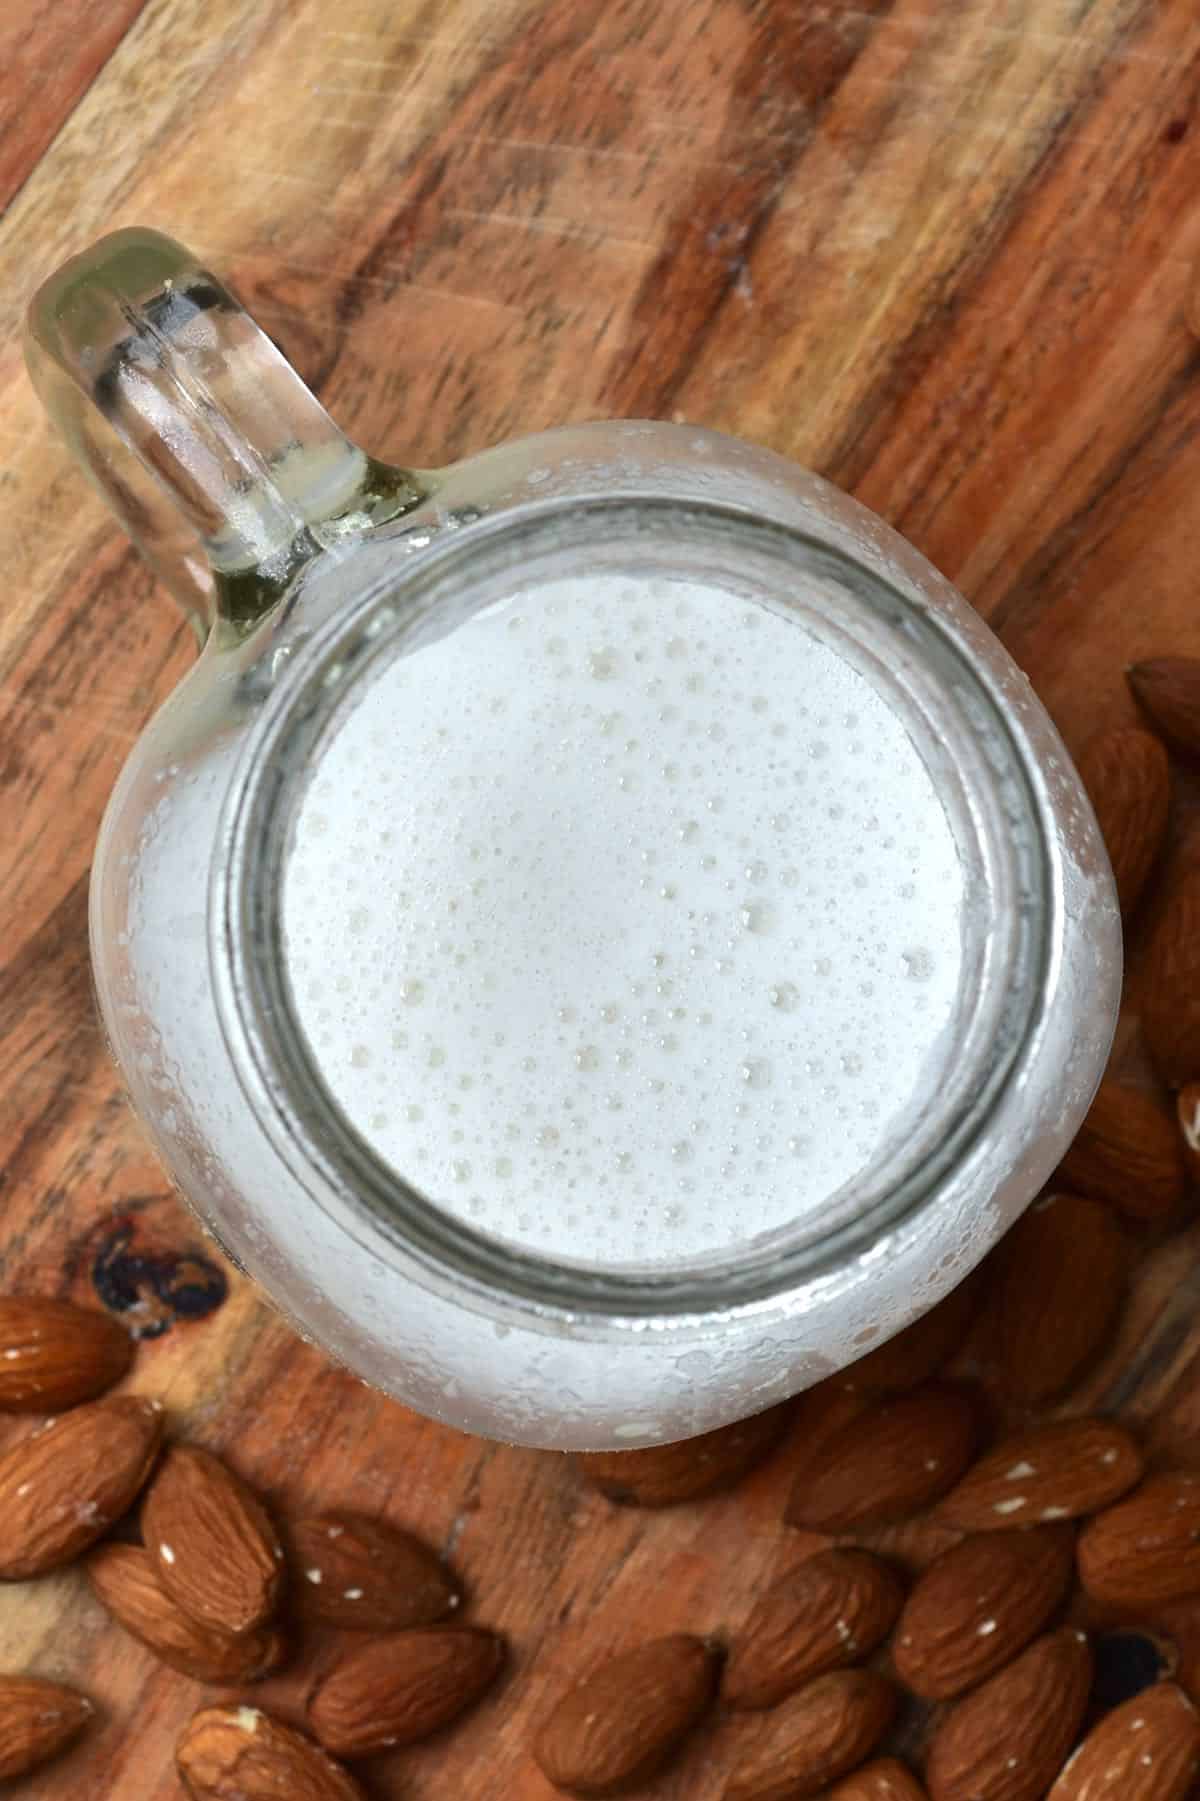 A glass with almond milk and some almonds around it